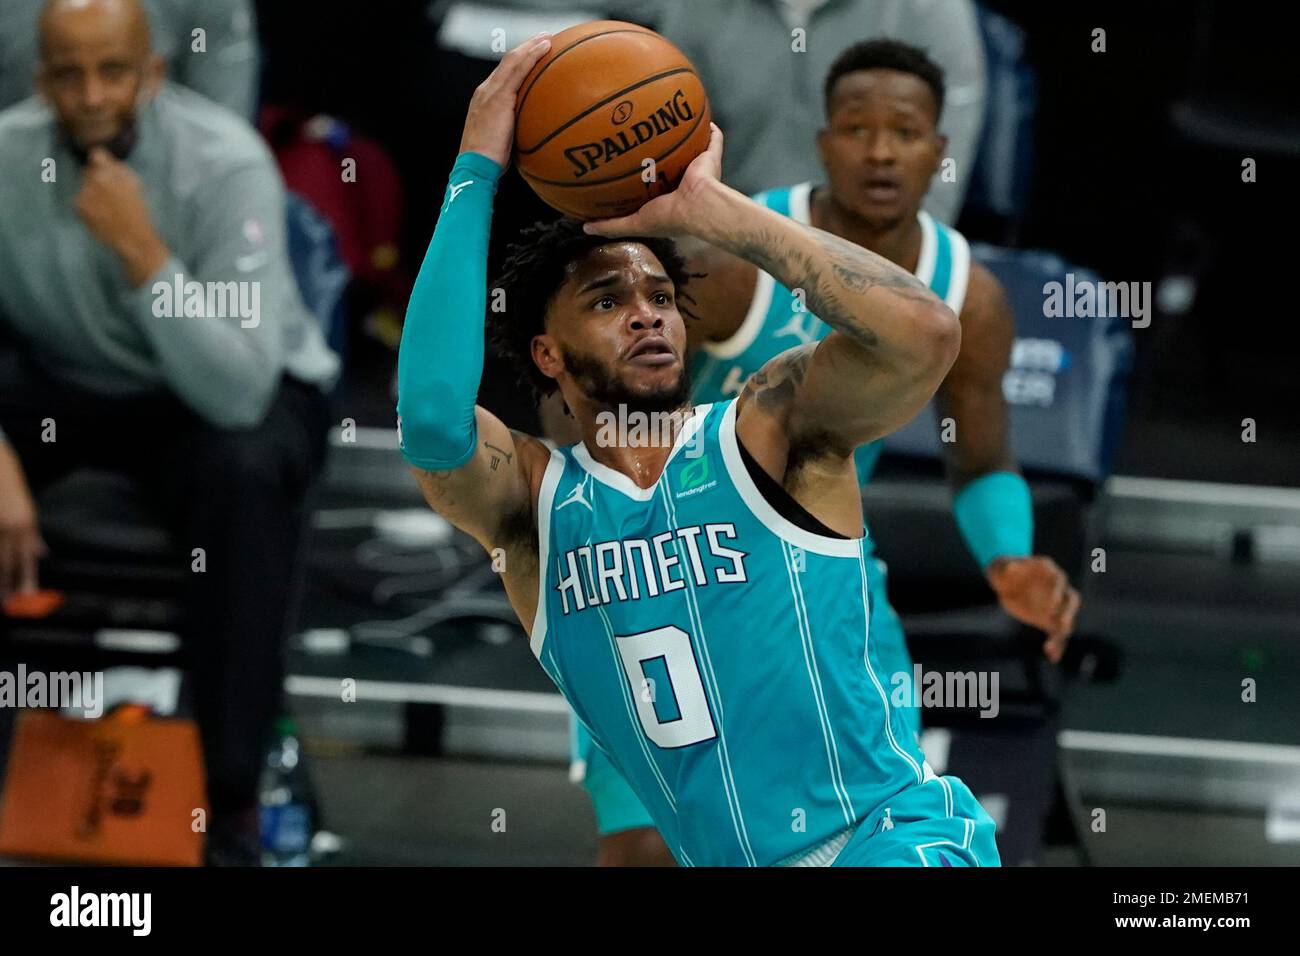 Charlotte Hornets forward Miles Bridges shoots against the Portland Trail Blazers during the second half in an NBA basketball game on Sunday, April 18, 2021, in Charlotte, N.C